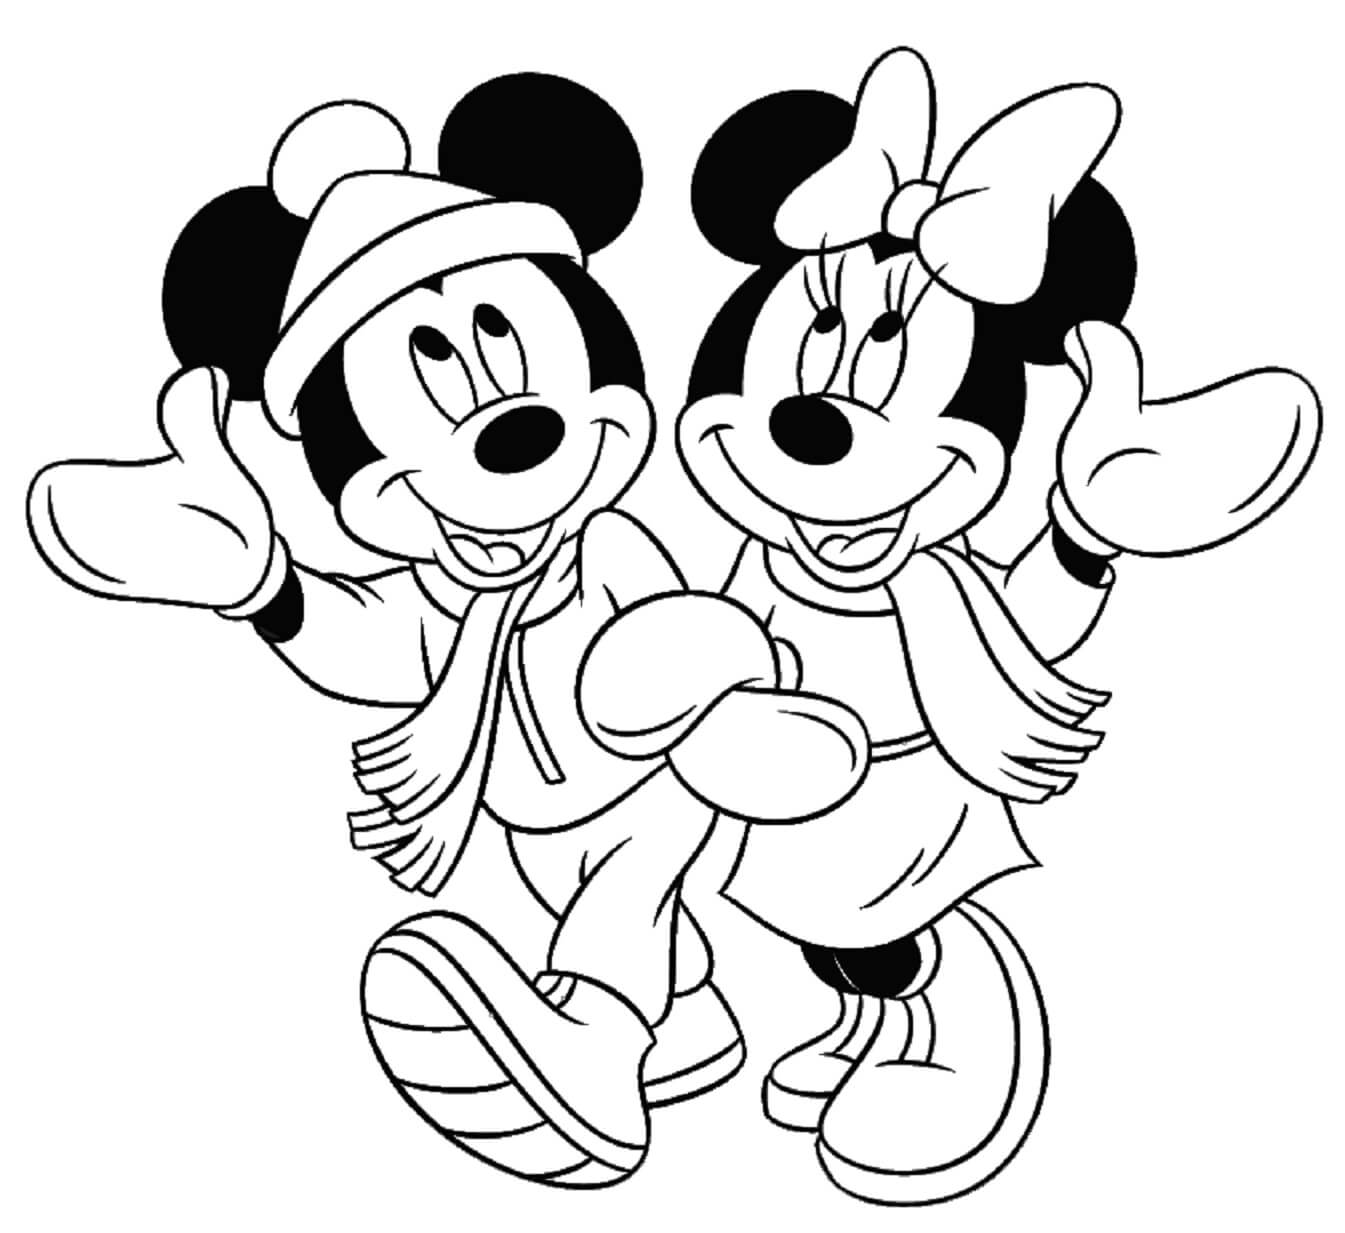 Minnie and mickey mouse walking coloring page